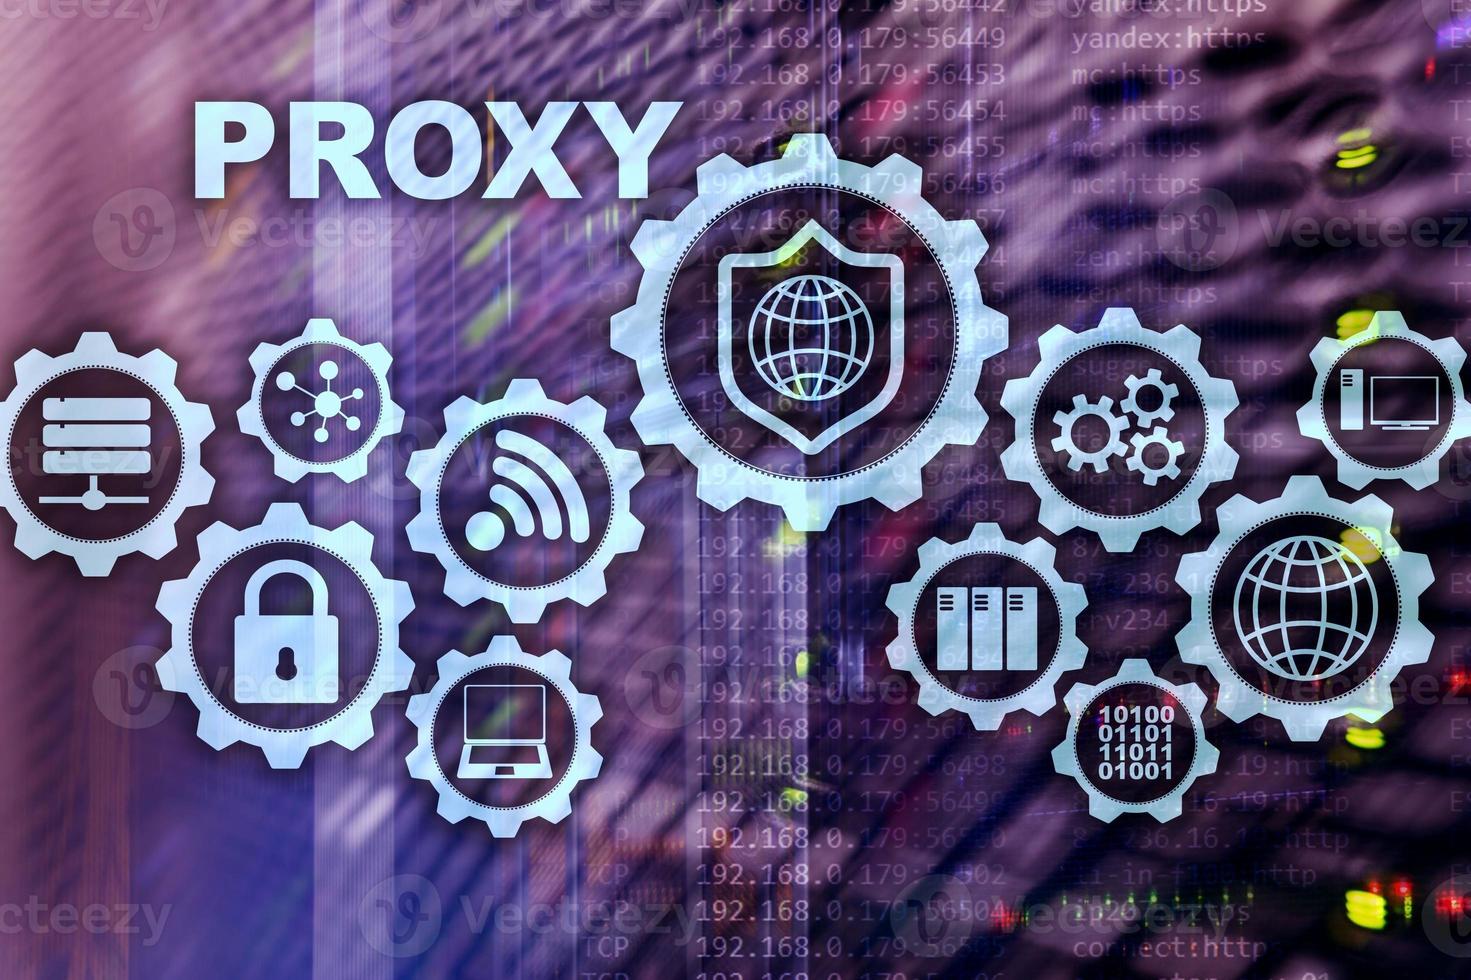 Proxy server. Cyber security. Concept of network security on virtual screen. Server room background photo